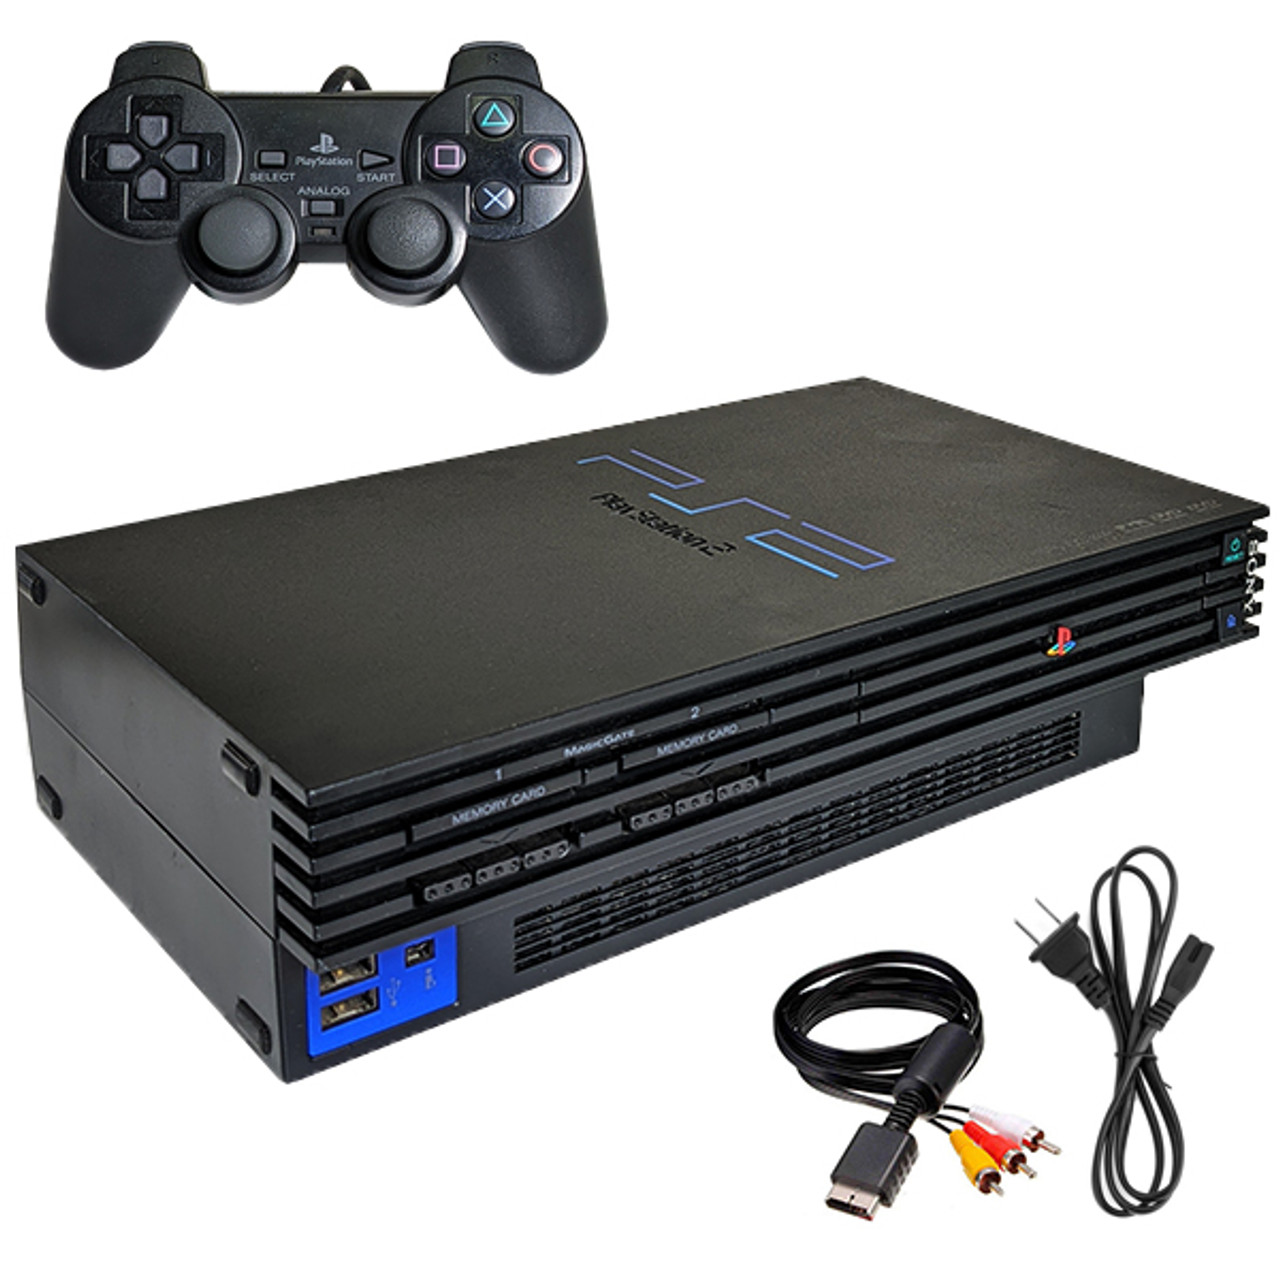 Sony PlayStation 2 PS2 Console Official Pad +5 Free Games - Choose Phat Or  Slim